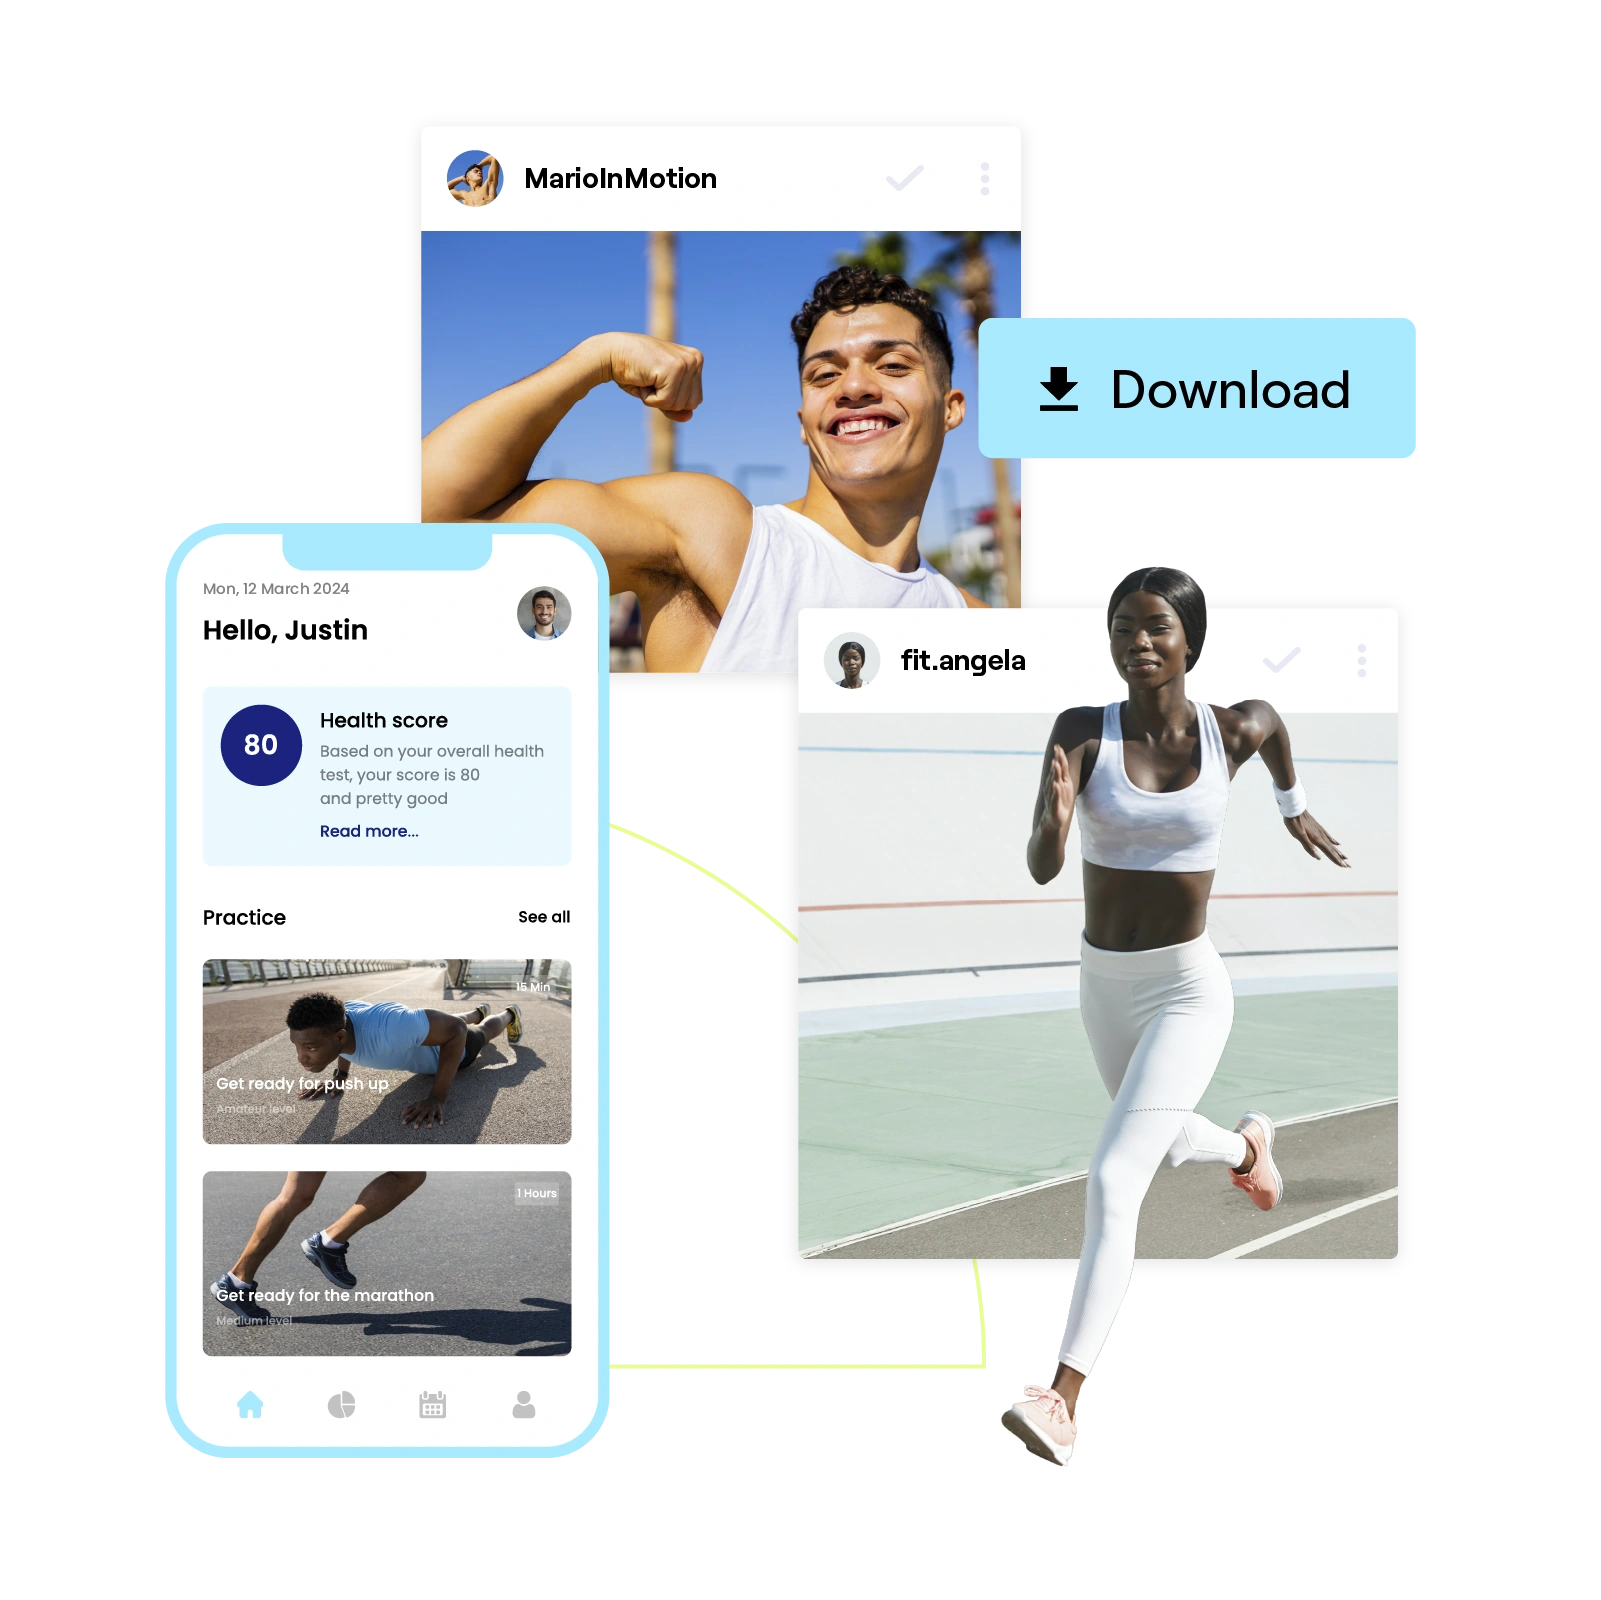 Stylized image of fitness creators and a fitness app